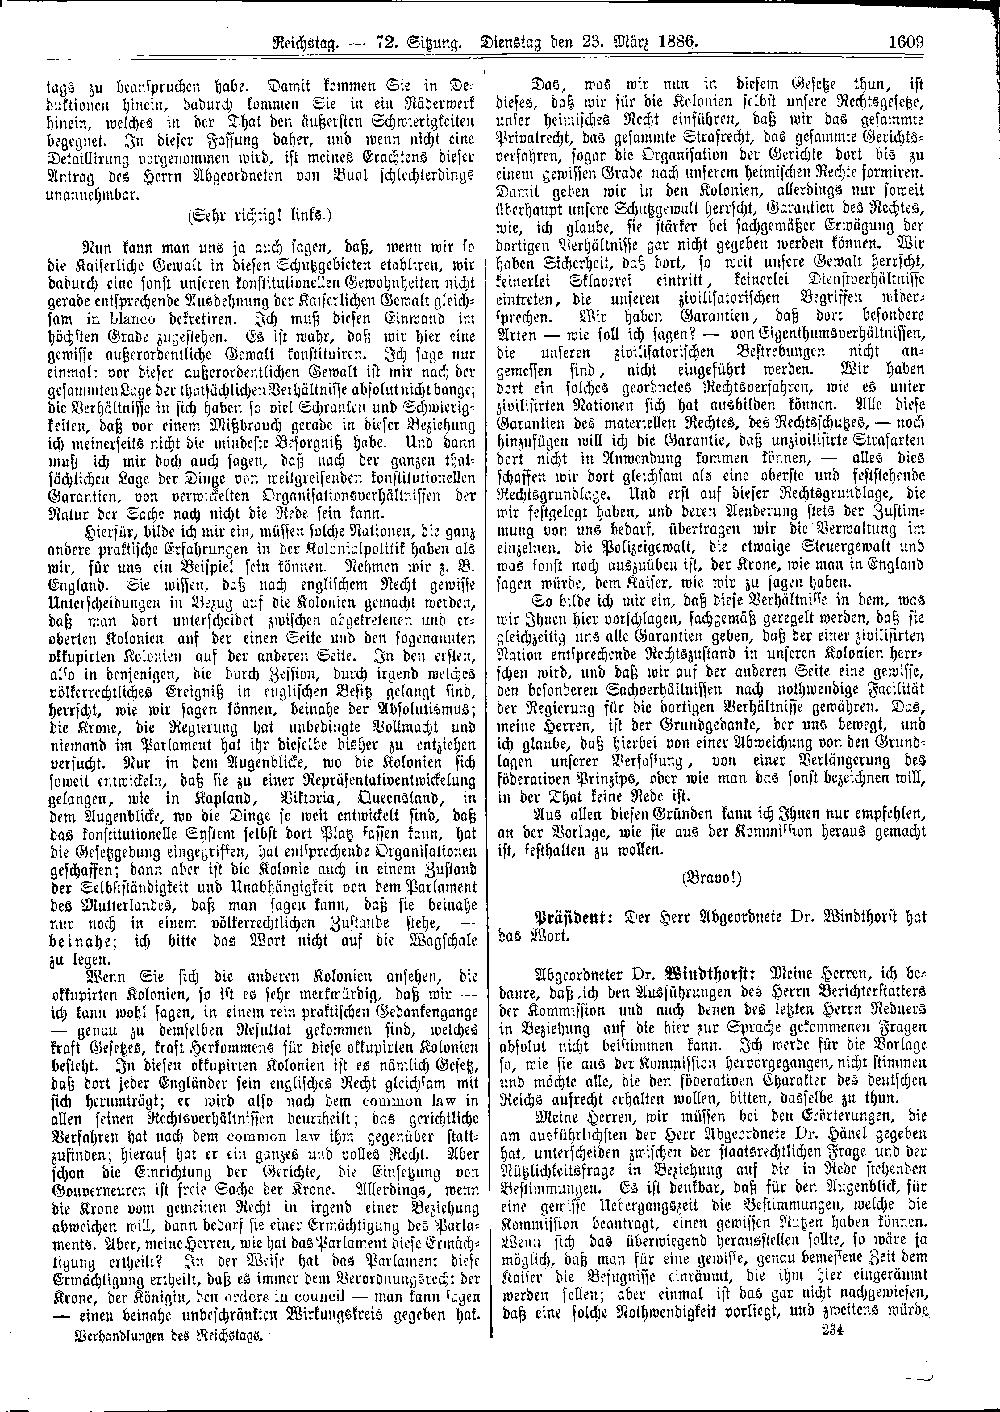 Scan of page 1609